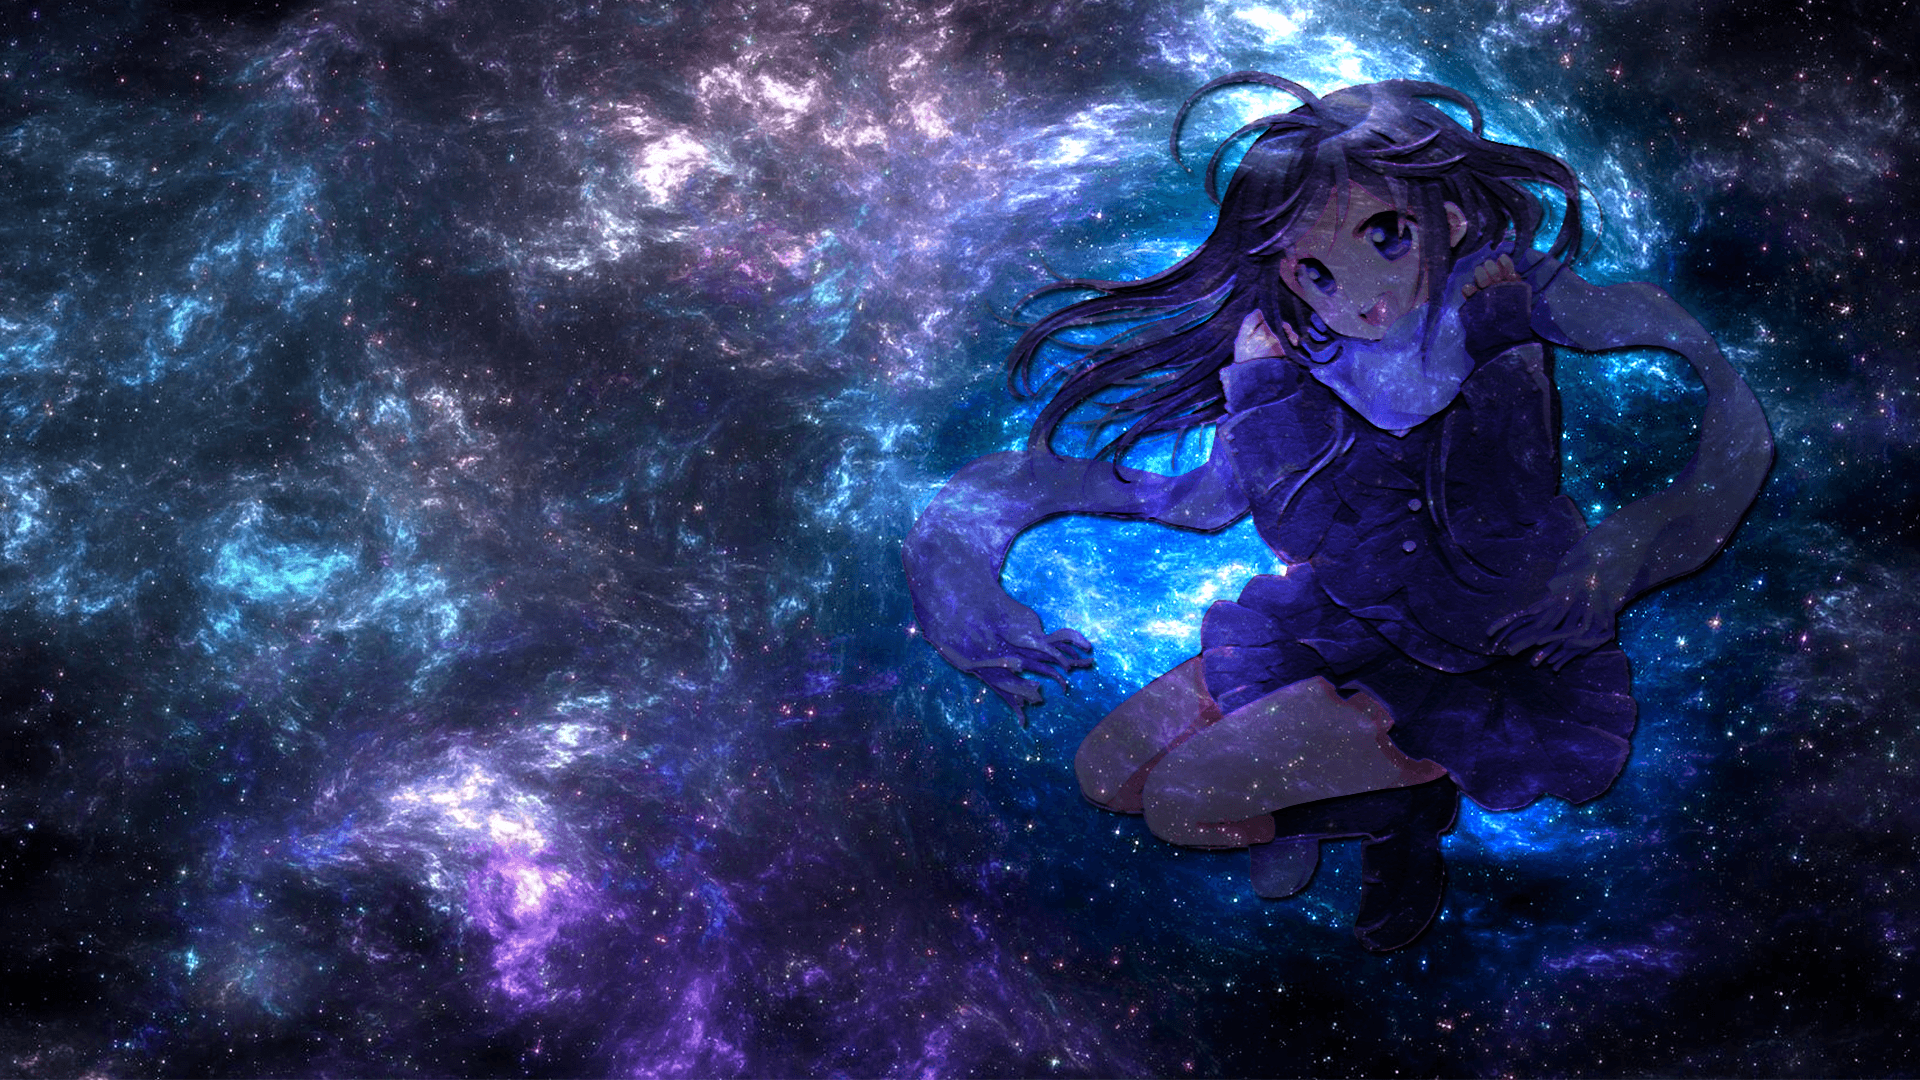 Download Wallpaper 1920x1080 anime space posture Full HD 1080p HD  Background